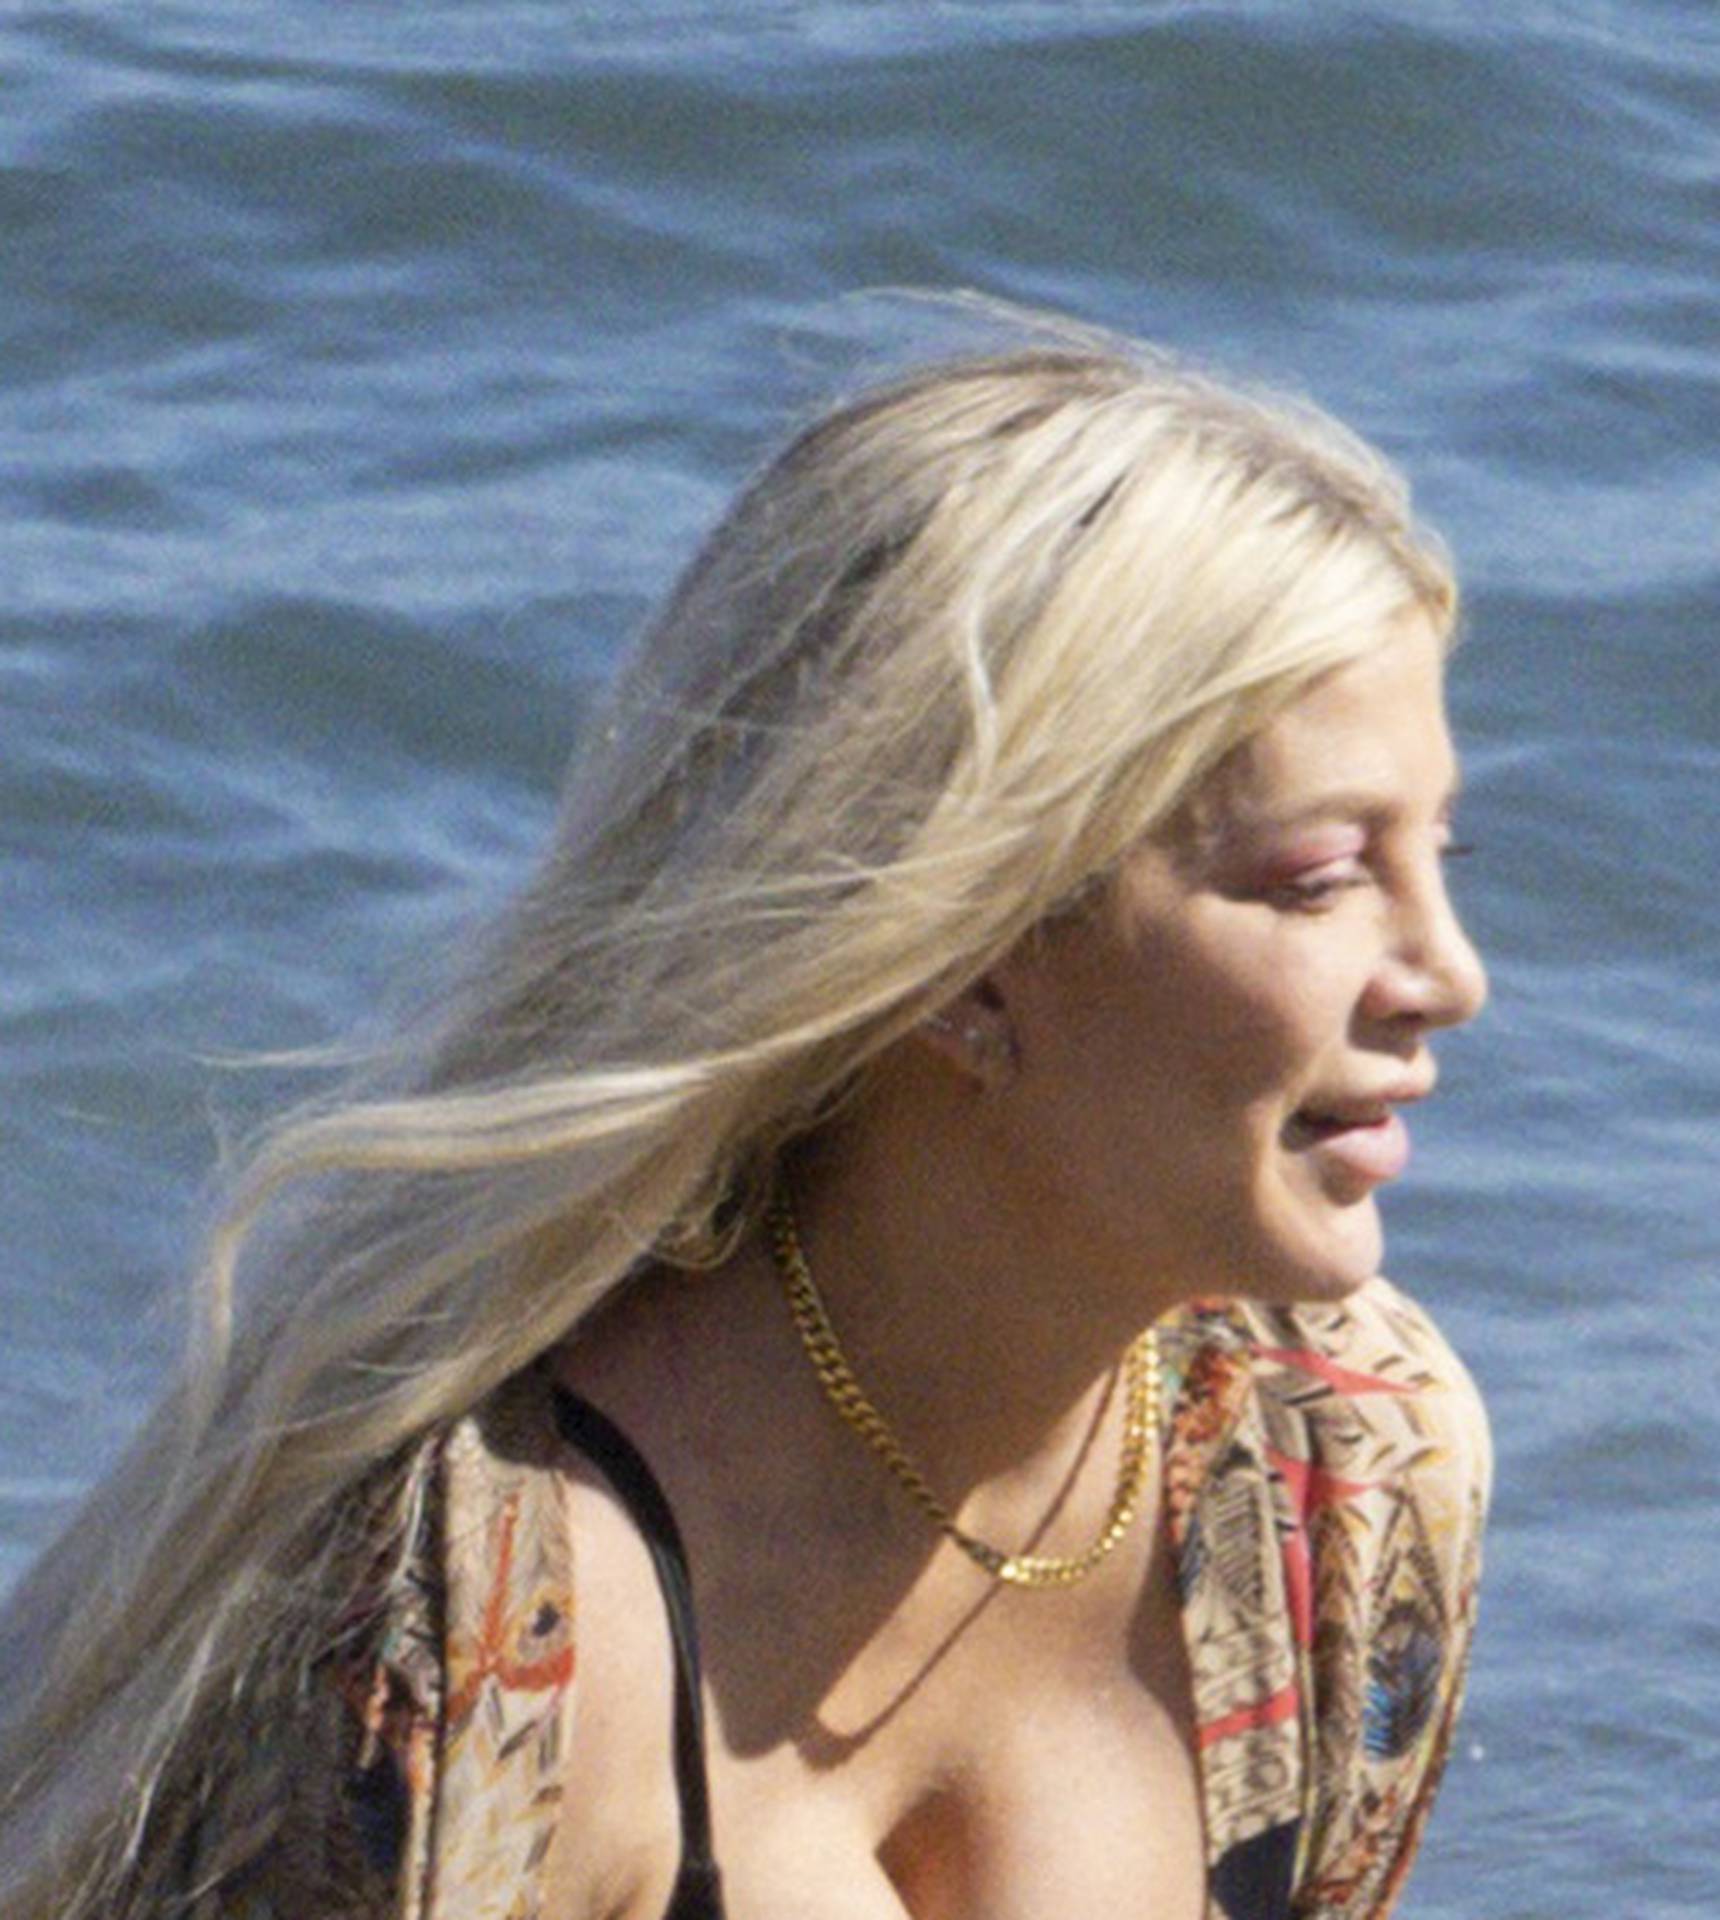 EXCLUSIVE: Mom To The Rescue ! Tori Spelling Jumps Into Action Quickly Saving Her Child After He Is Knocked Over By Strong Waves In The Malibu Surf